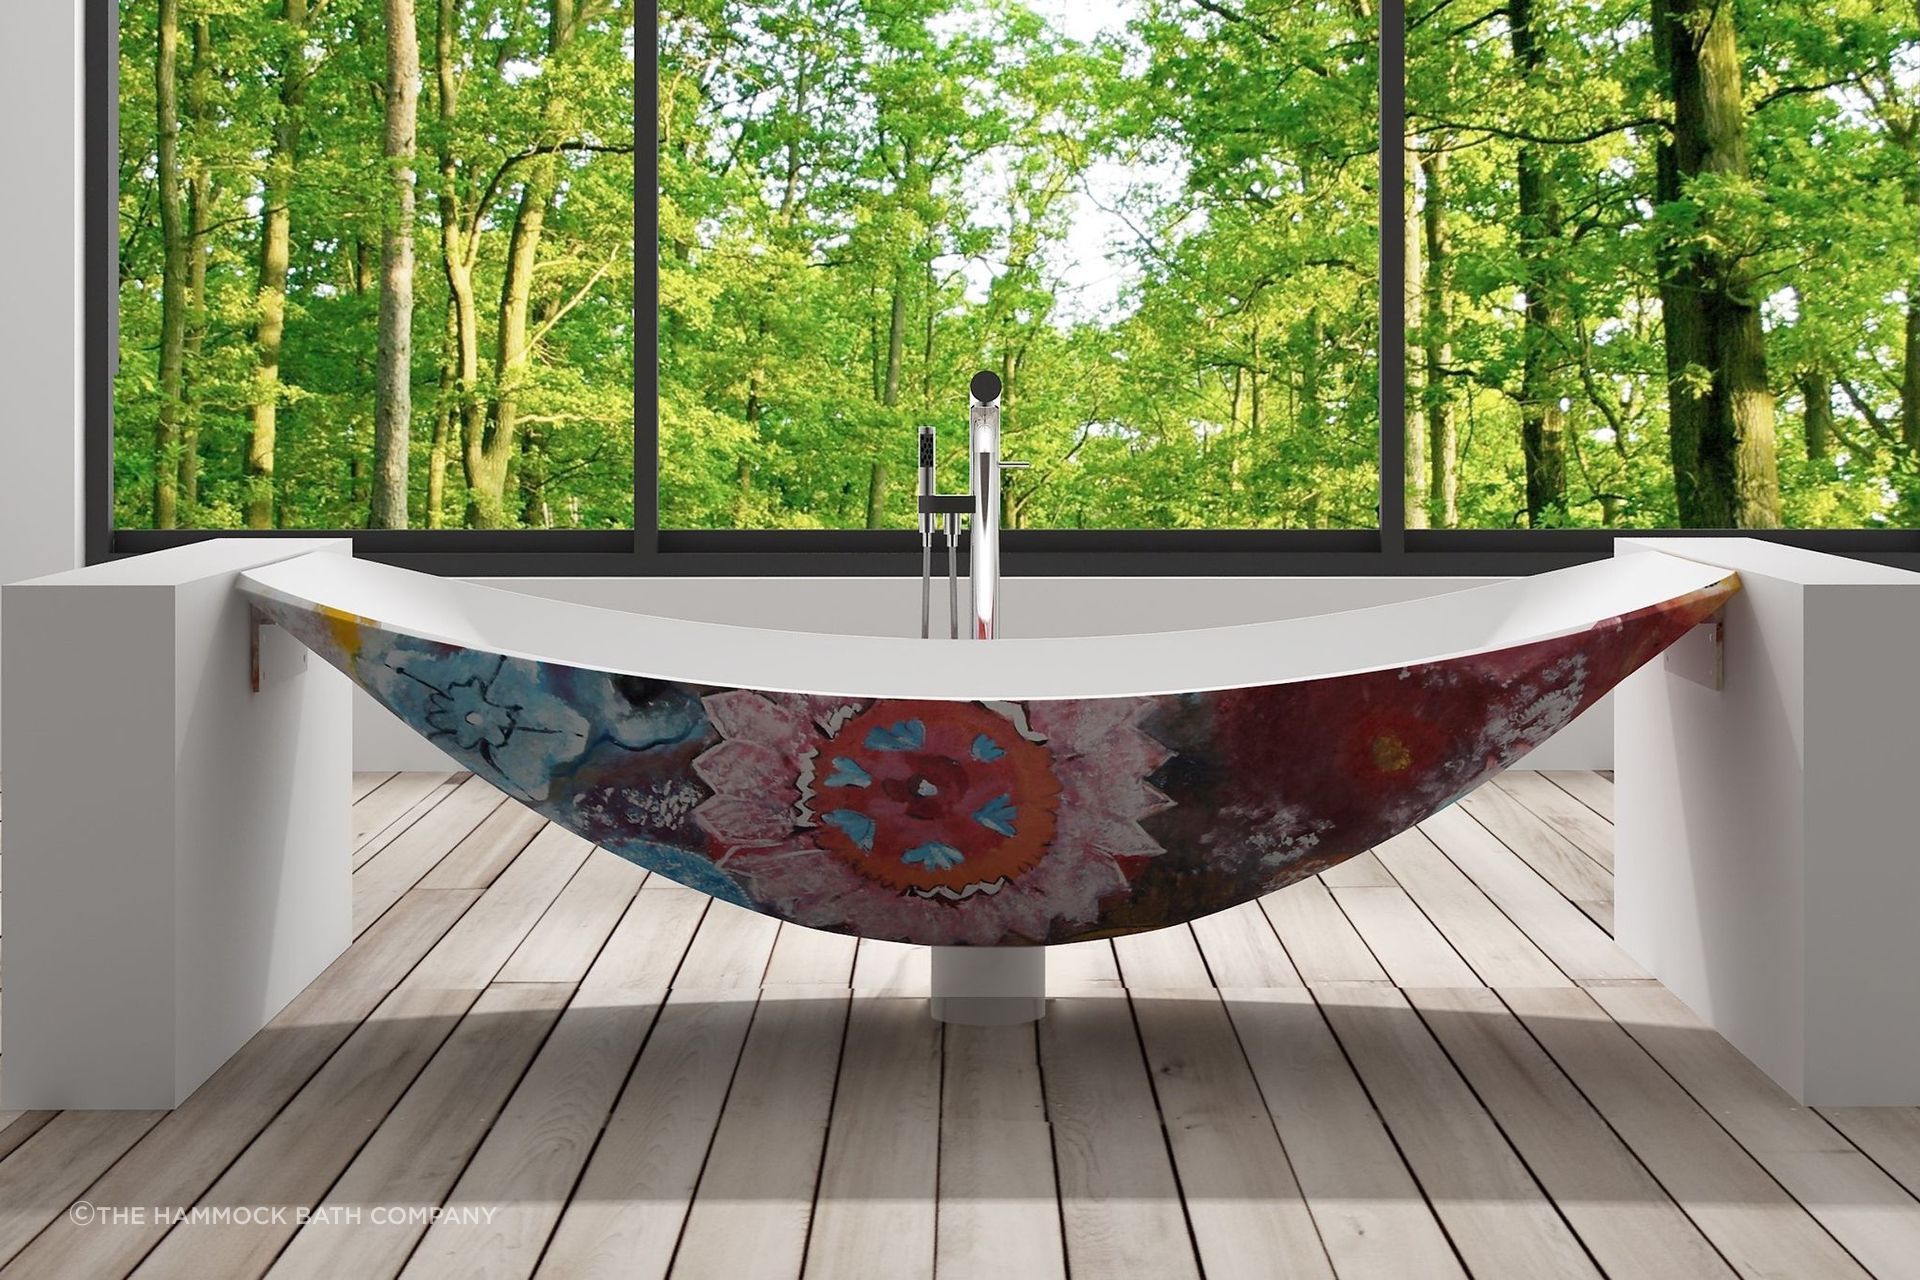 The hammock bathtub gives a bathroom a sleek and smooth finish and is truly a standout feature